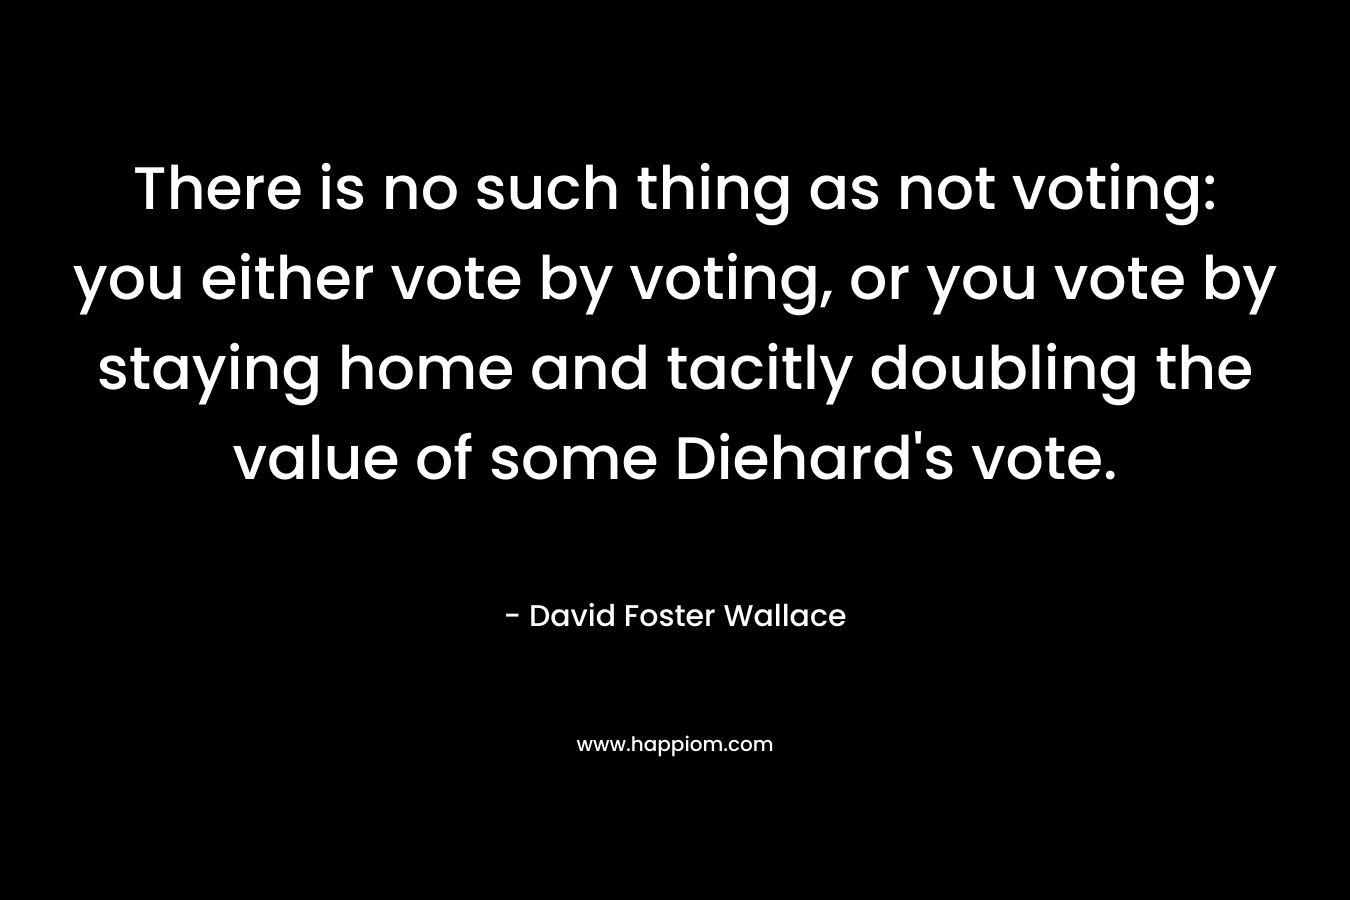 There is no such thing as not voting: you either vote by voting, or you vote by staying home and tacitly doubling the value of some Diehard's vote.